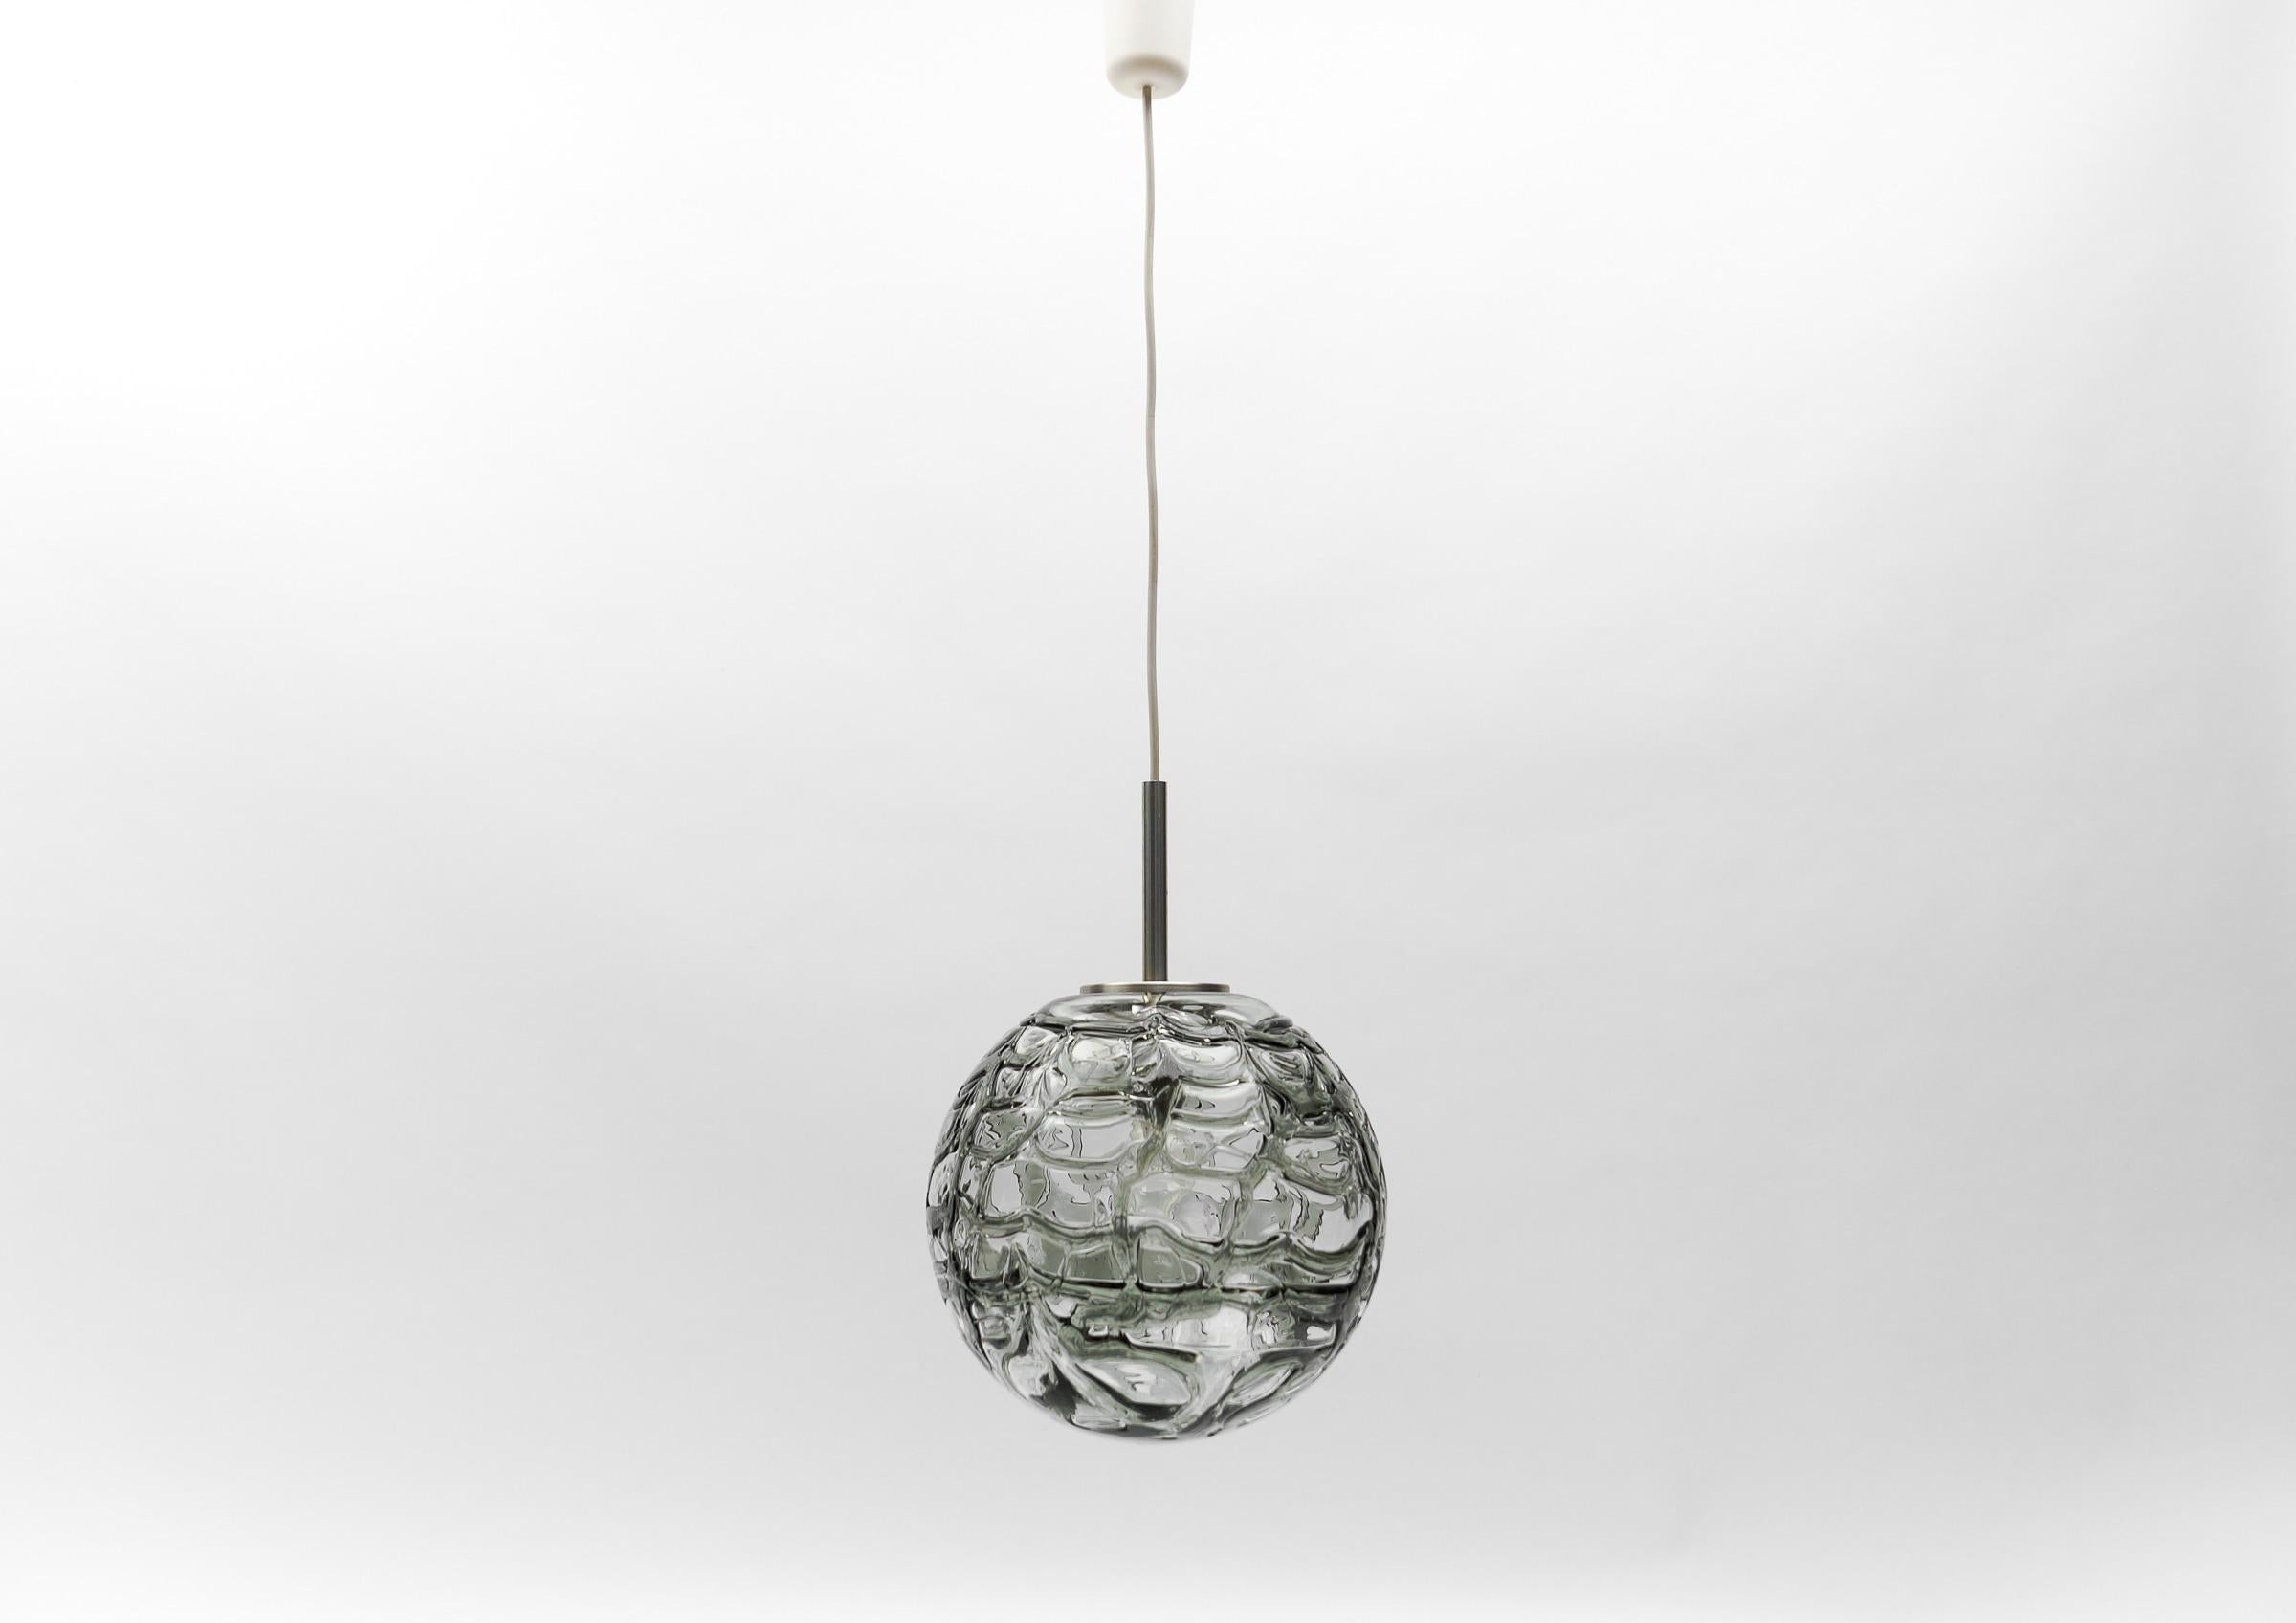 Lovely Black Murano Glass Ball Pendant Lamp by Doria, - 1960s Germany

Dimensions
Diameter: 11.81 in. (30 cm)
Height: 41.33 in. (105 cm)

One E27 socket. Works with 220V and 110V.

Our lamps are checked, cleaned and are suitable for use in the USA.